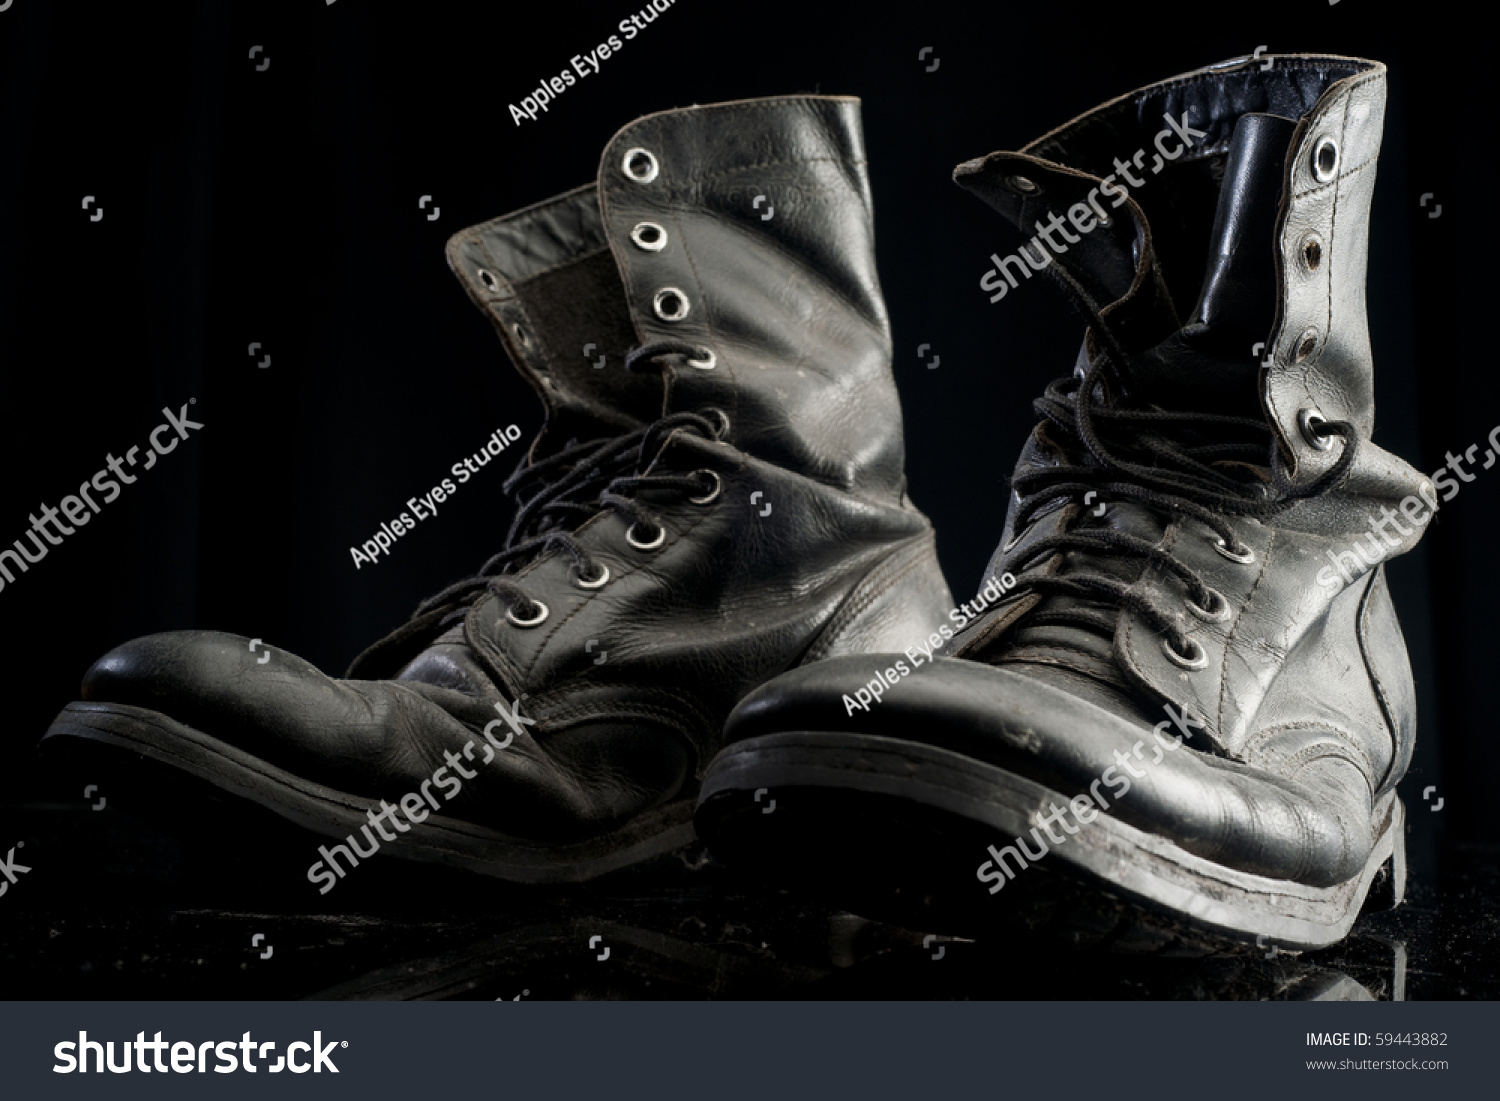 Old Army Boots Stock Photo 59443882 - Shutterstock